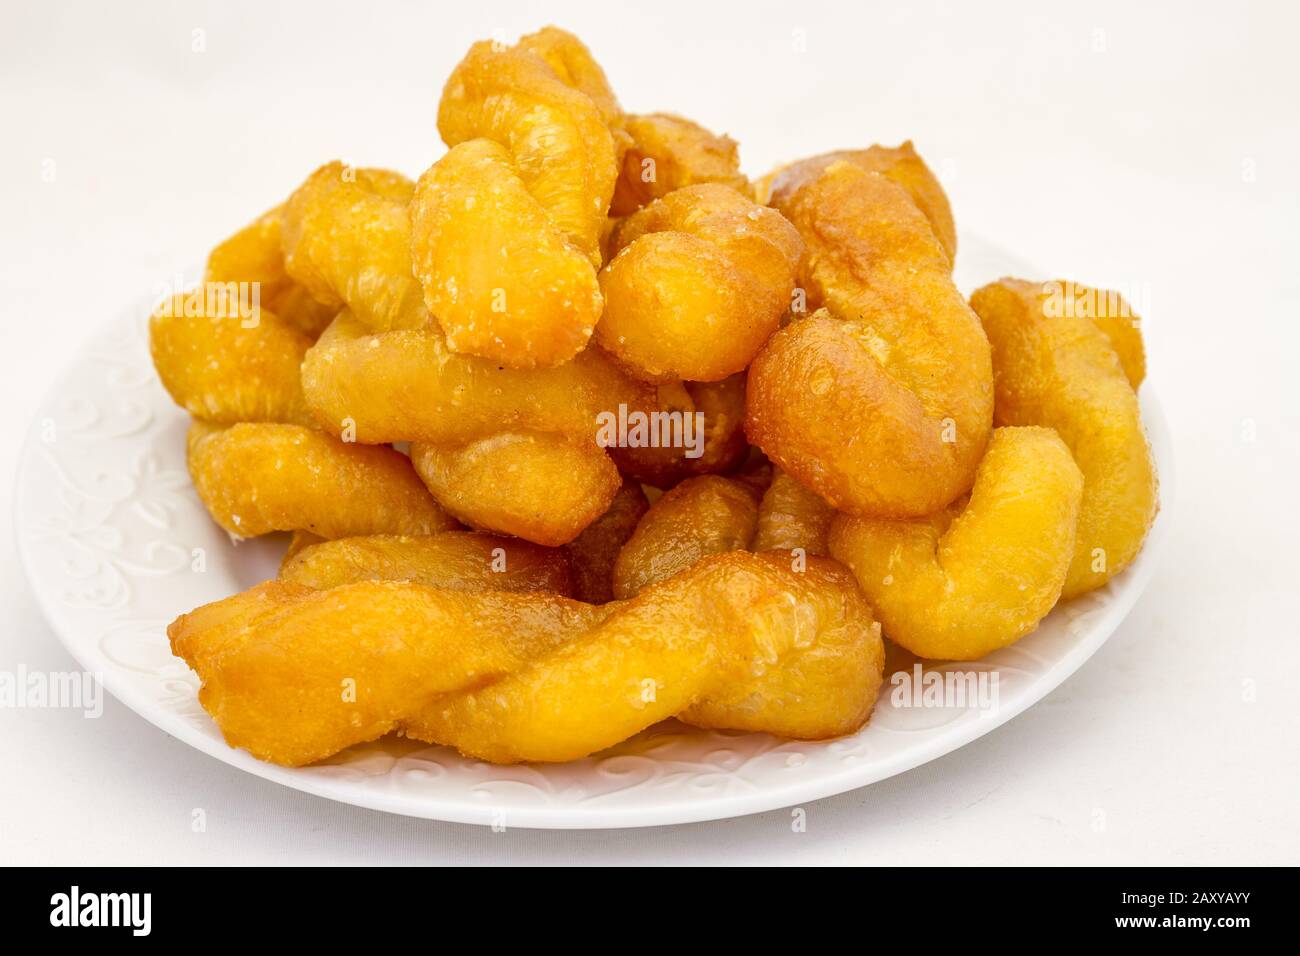 Koeksisters are a traditional Afrikaner confectionery made of fried dough and infused in syrup or honey image in horizontal format Stock Photo